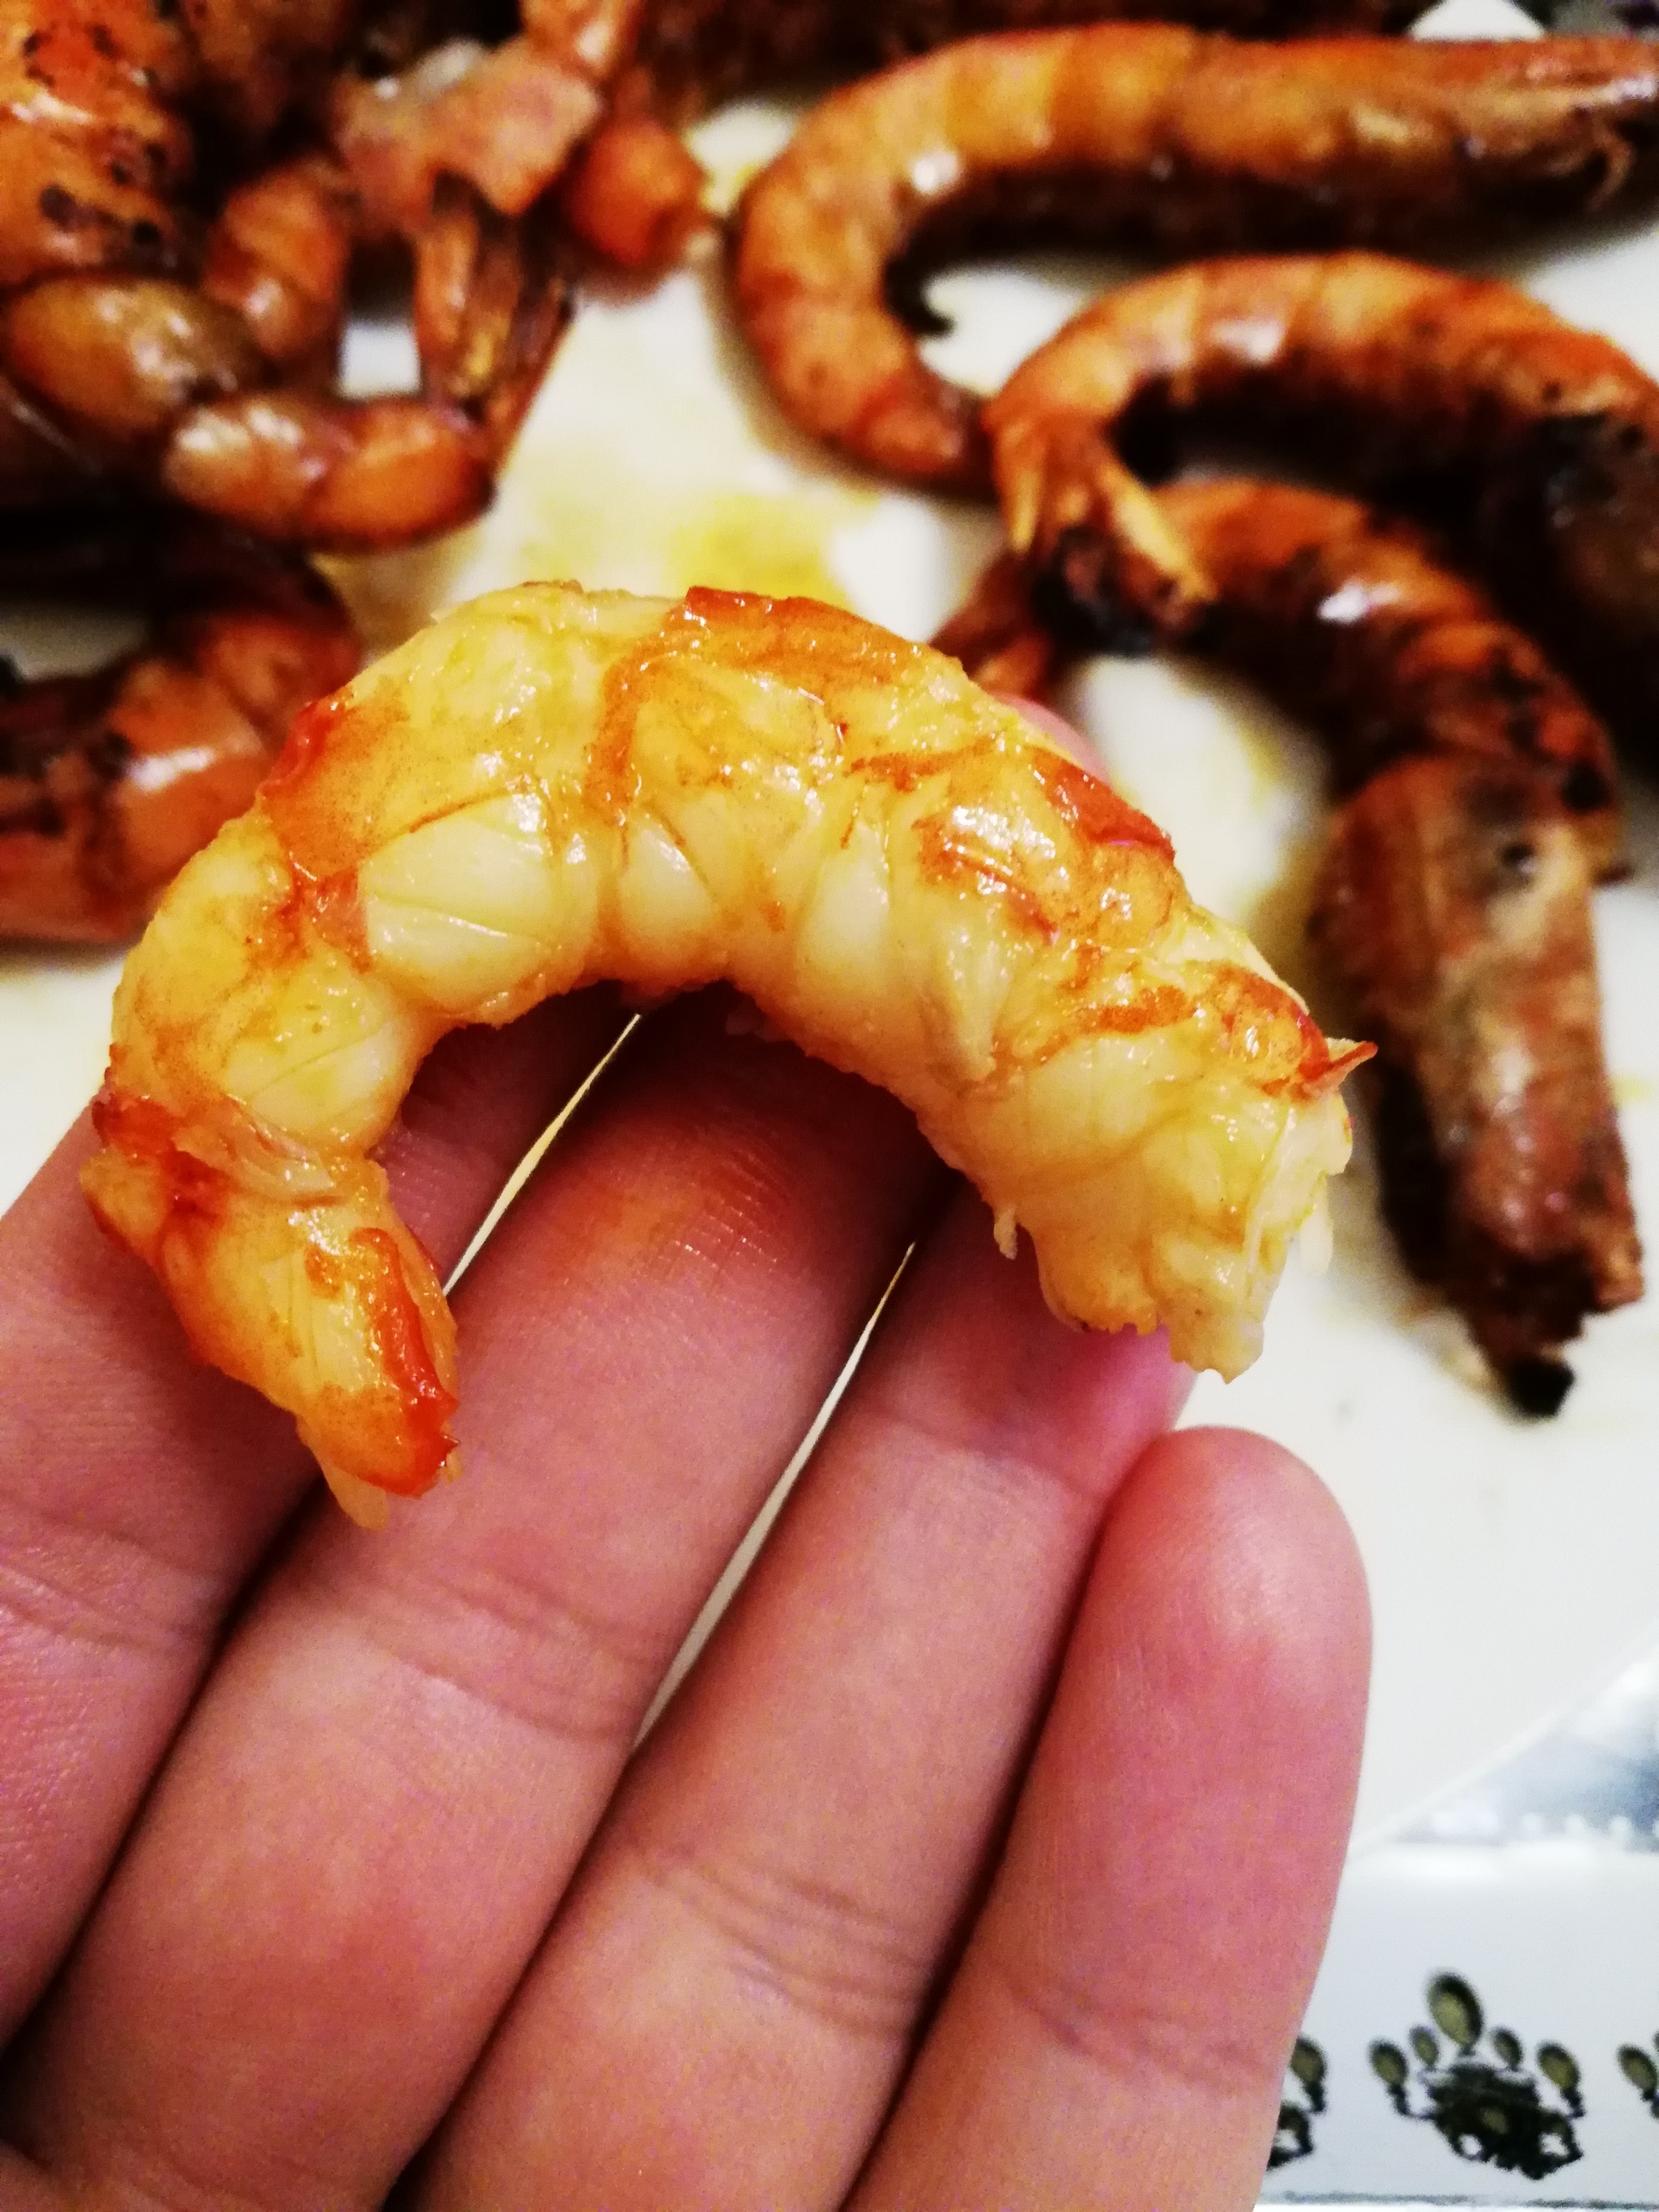 Fried Argentine shrimps (langoustines) + marinade - My, Food, Shrimps, Seafood, Recipe, Yummy, Preparation, Yummy, Cooking, Video, Longpost